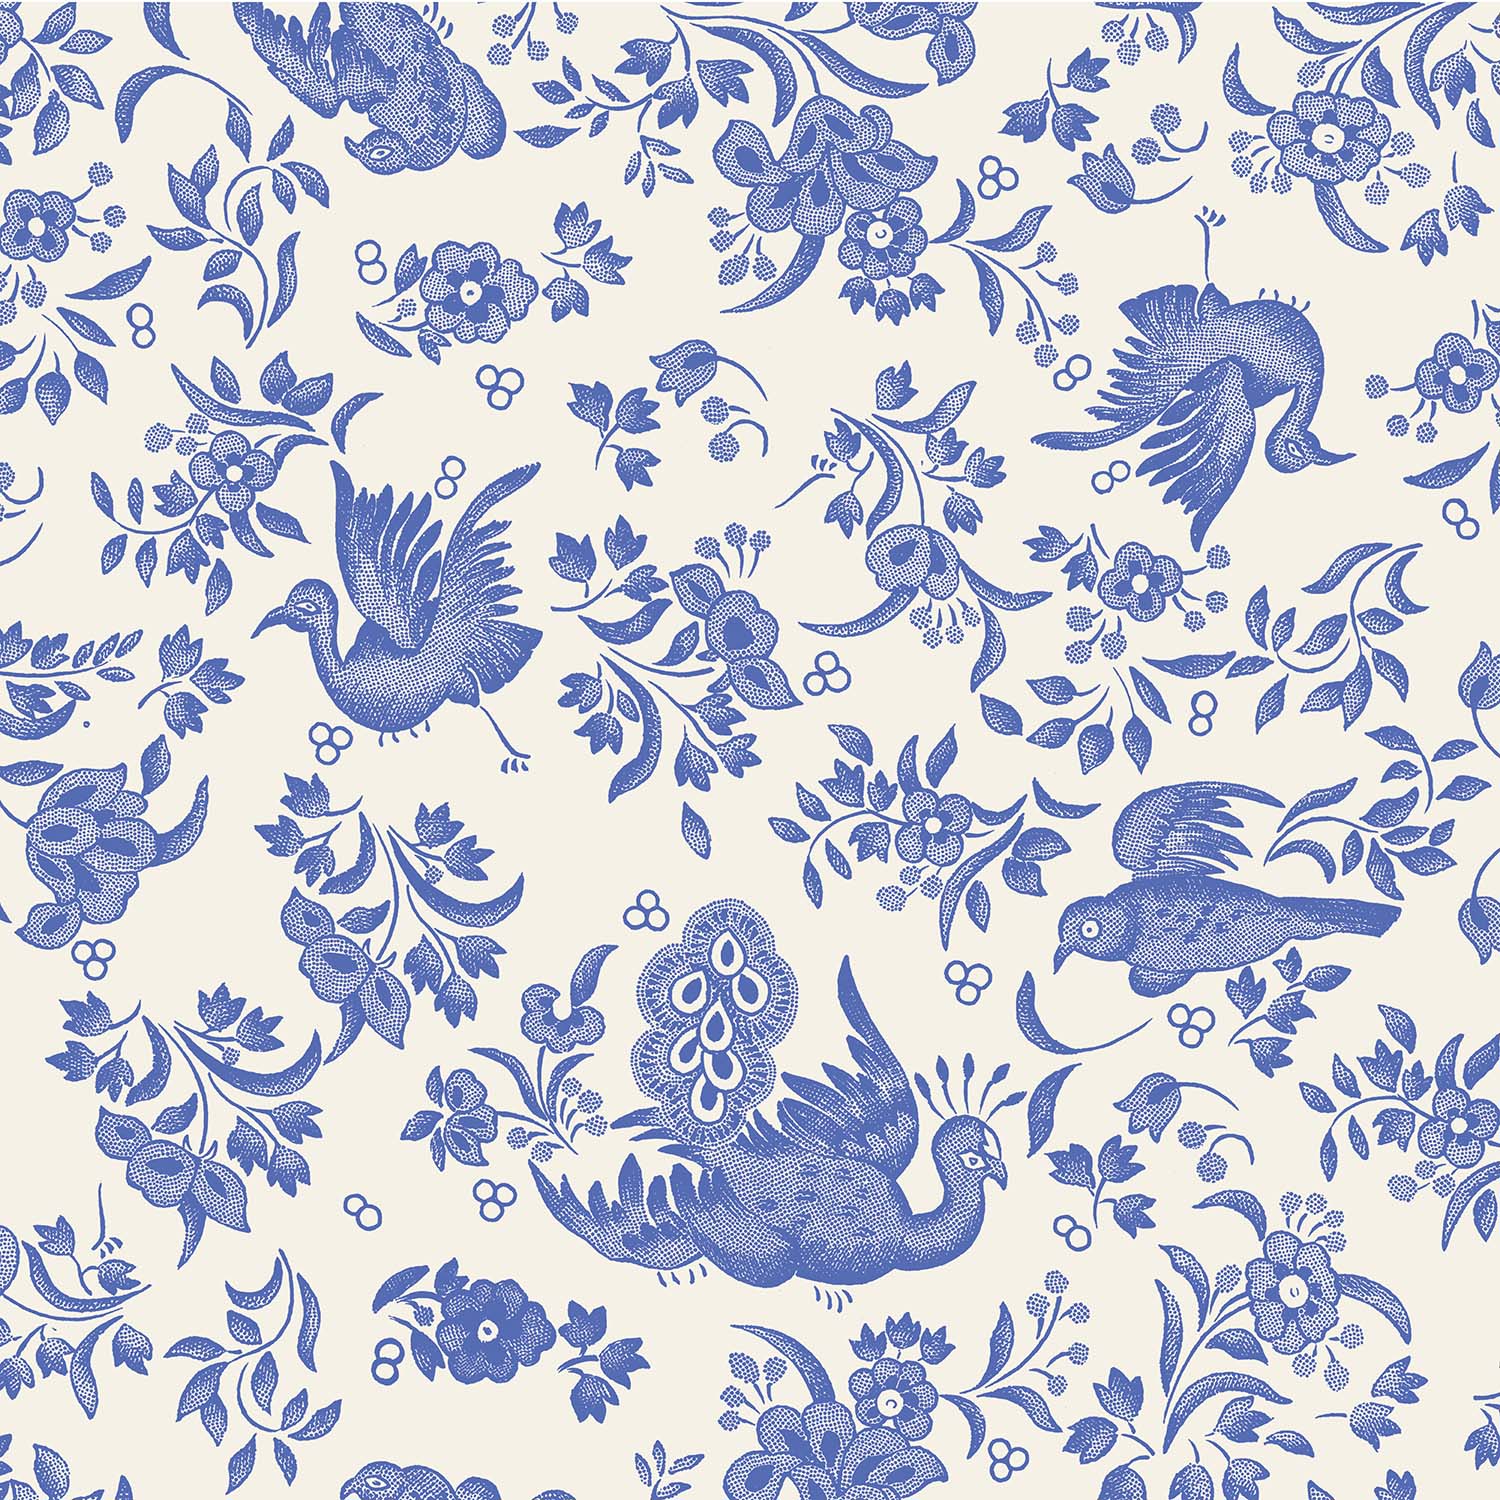 A Blue Regal Peacock pattern on Hester &amp; Cook napkins.